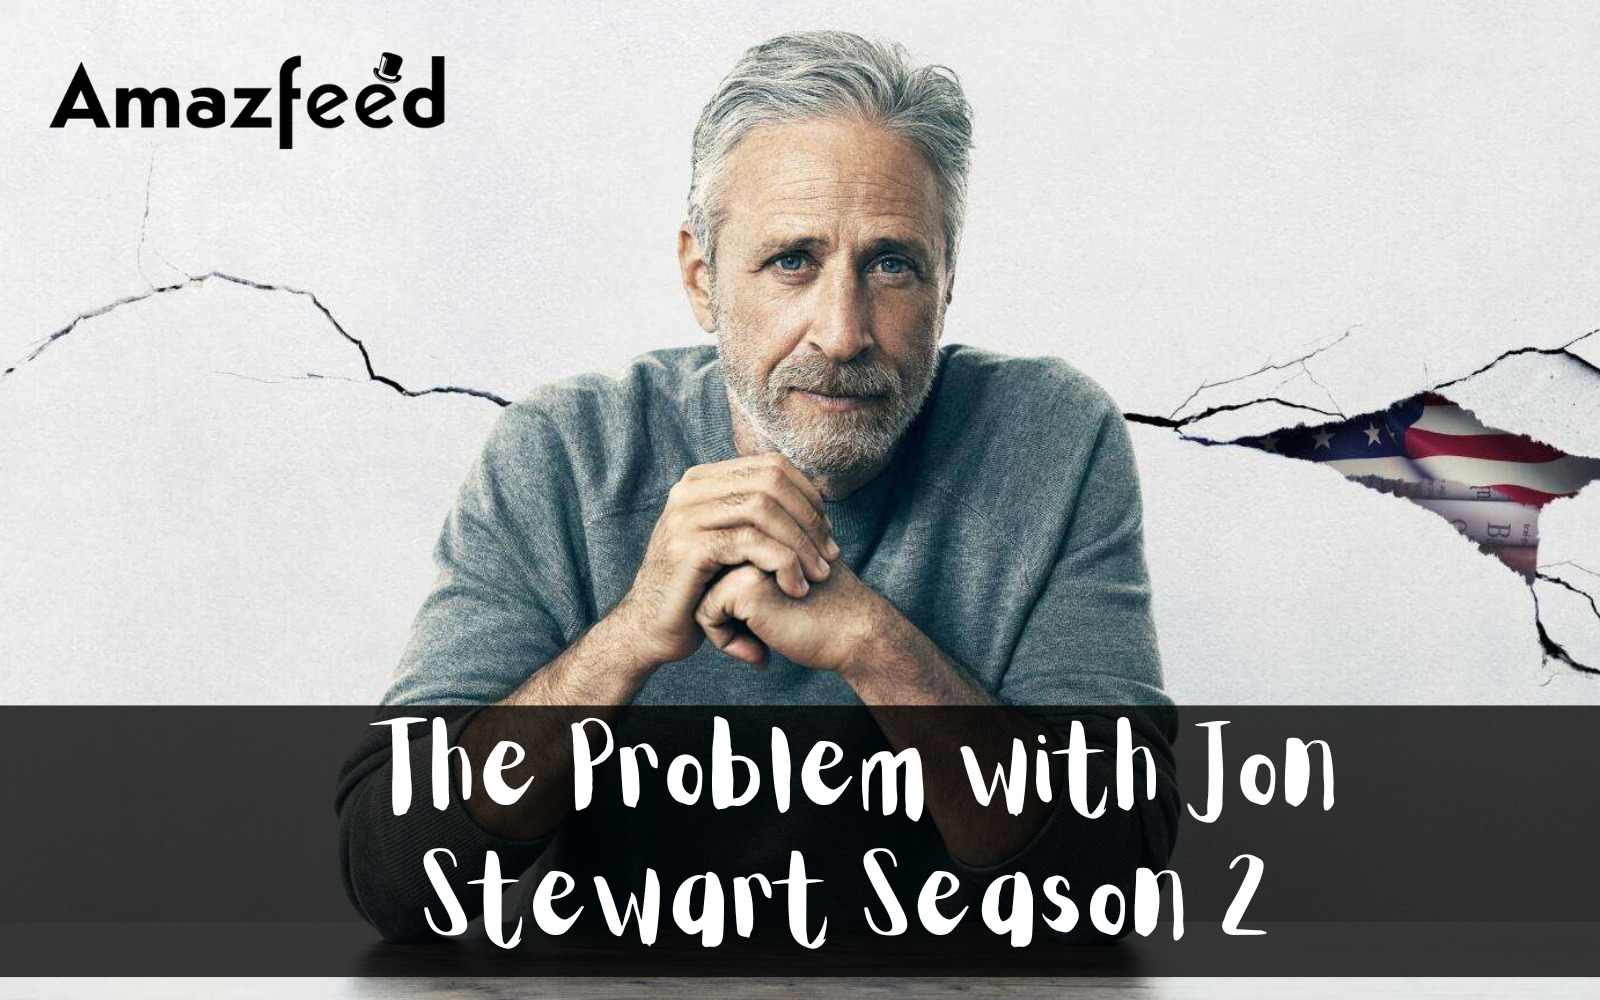 When Is The Problem with Jon Stewart Season 2 Coming Out (Release Date)